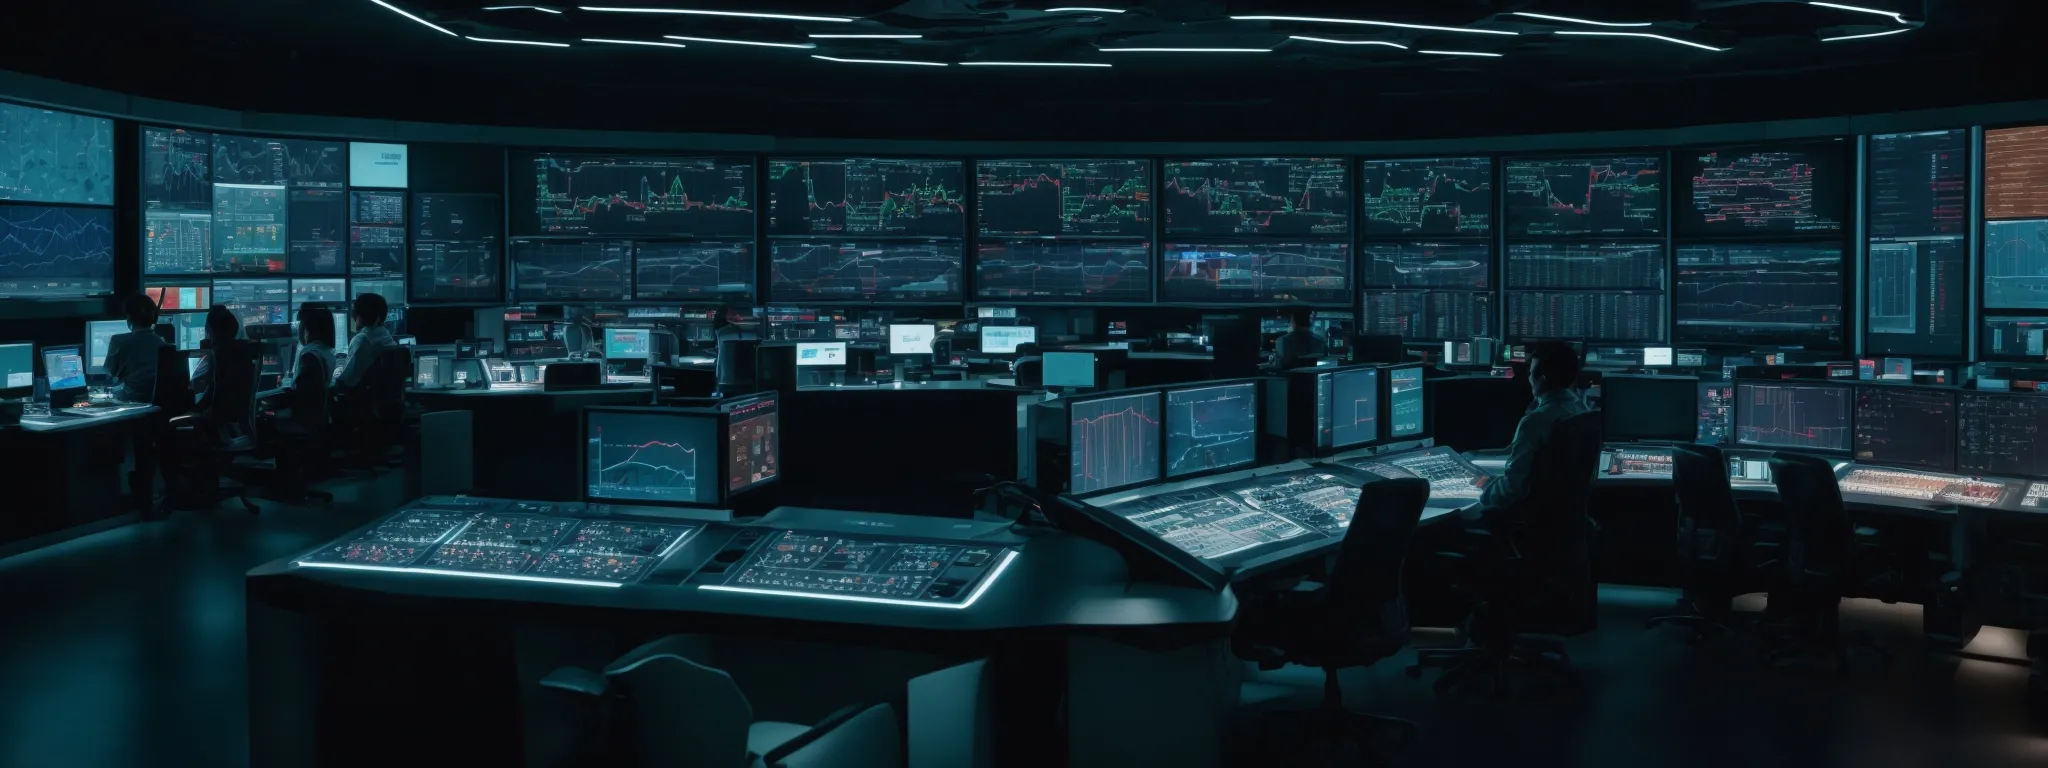 a futuristic control room filled with computer screens displaying data analytics and artificial intelligence interfaces.